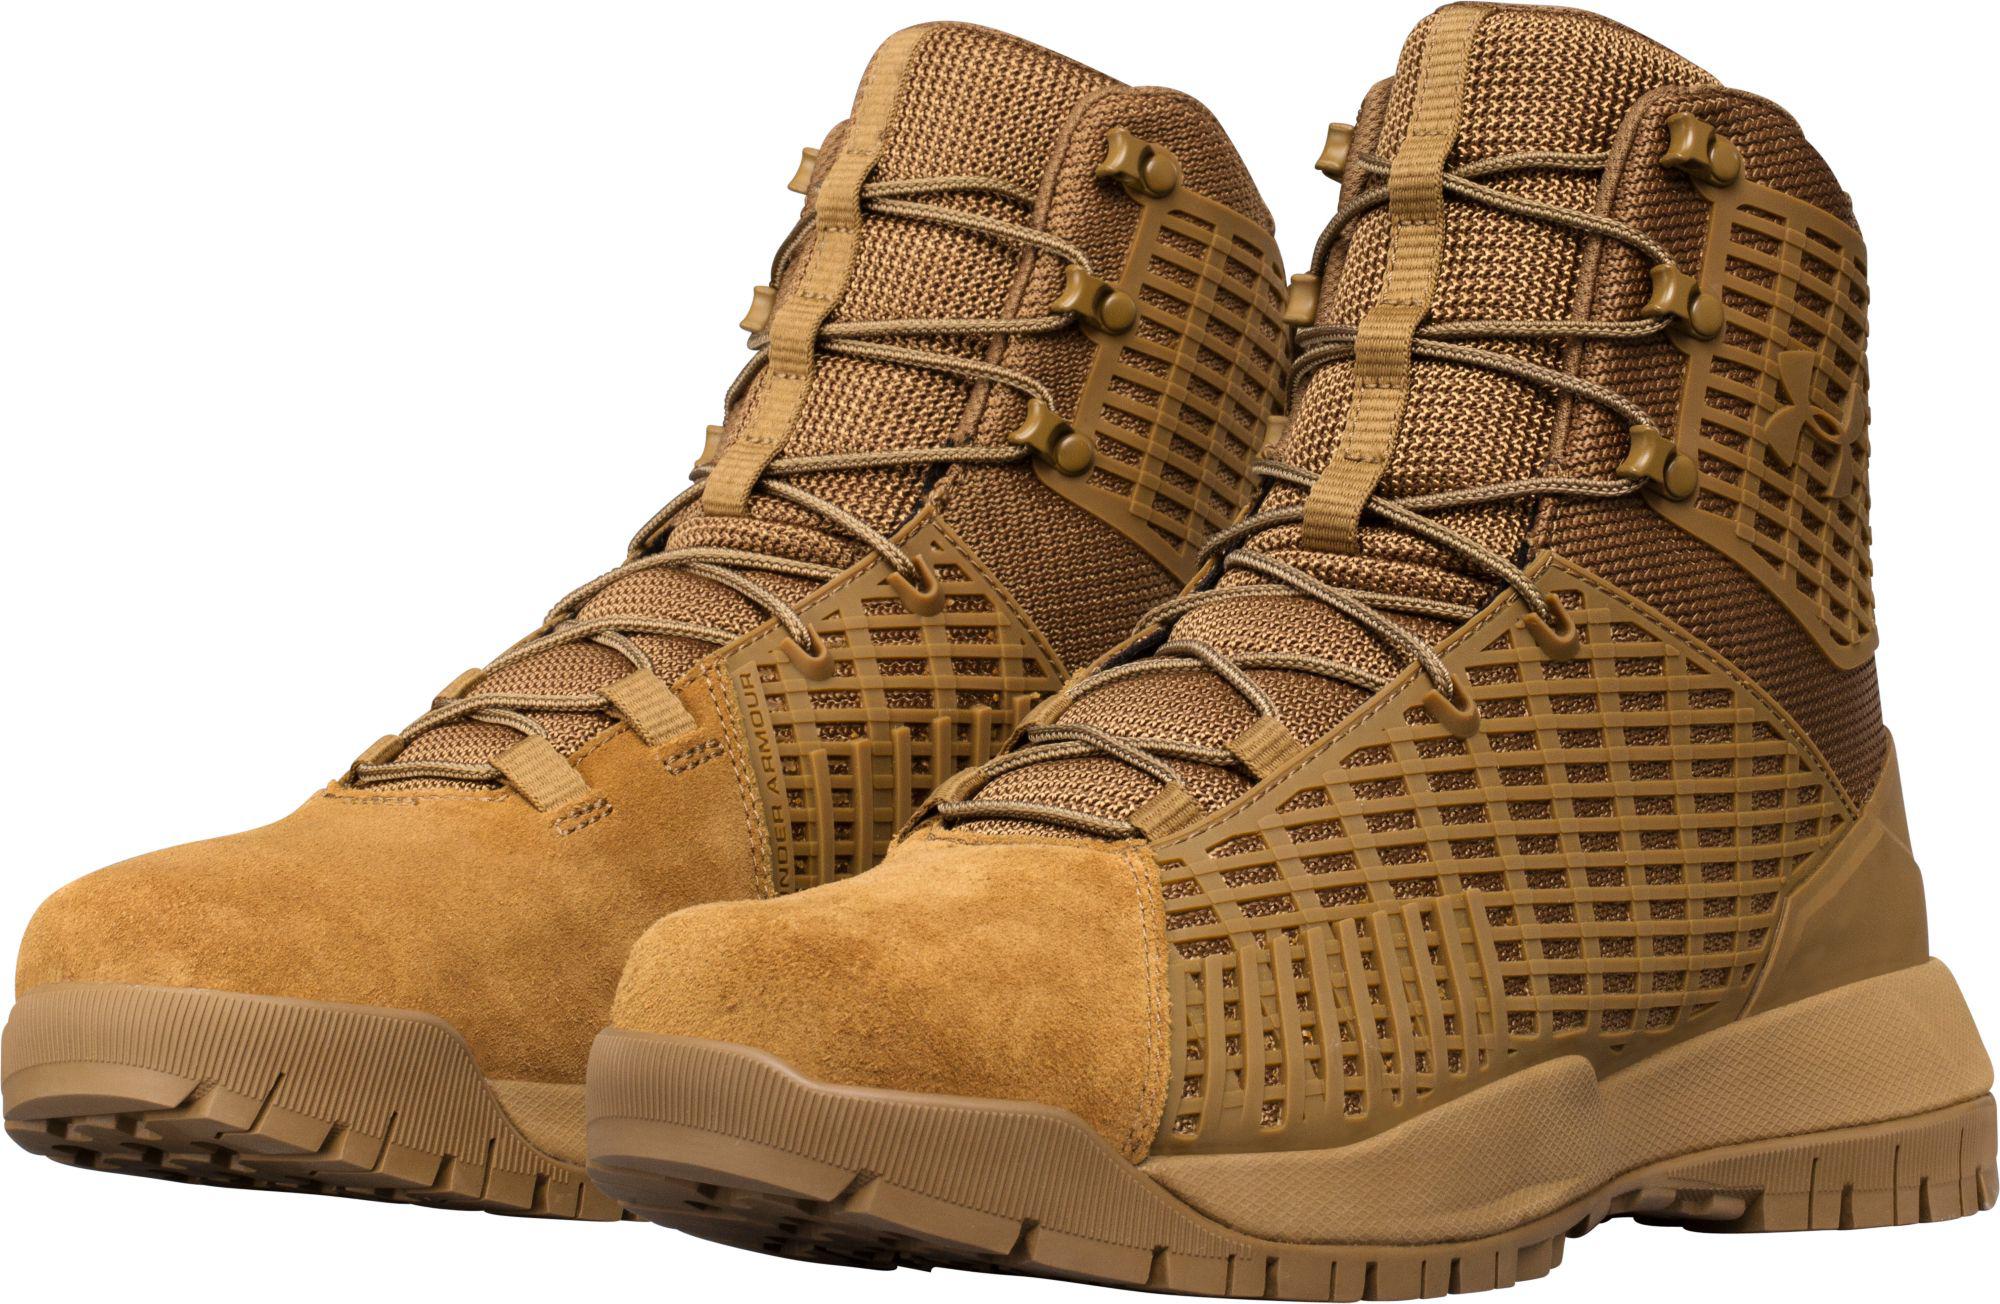 Under Armour Lace Stryker Tactical Boots in Brown for Men - Lyst